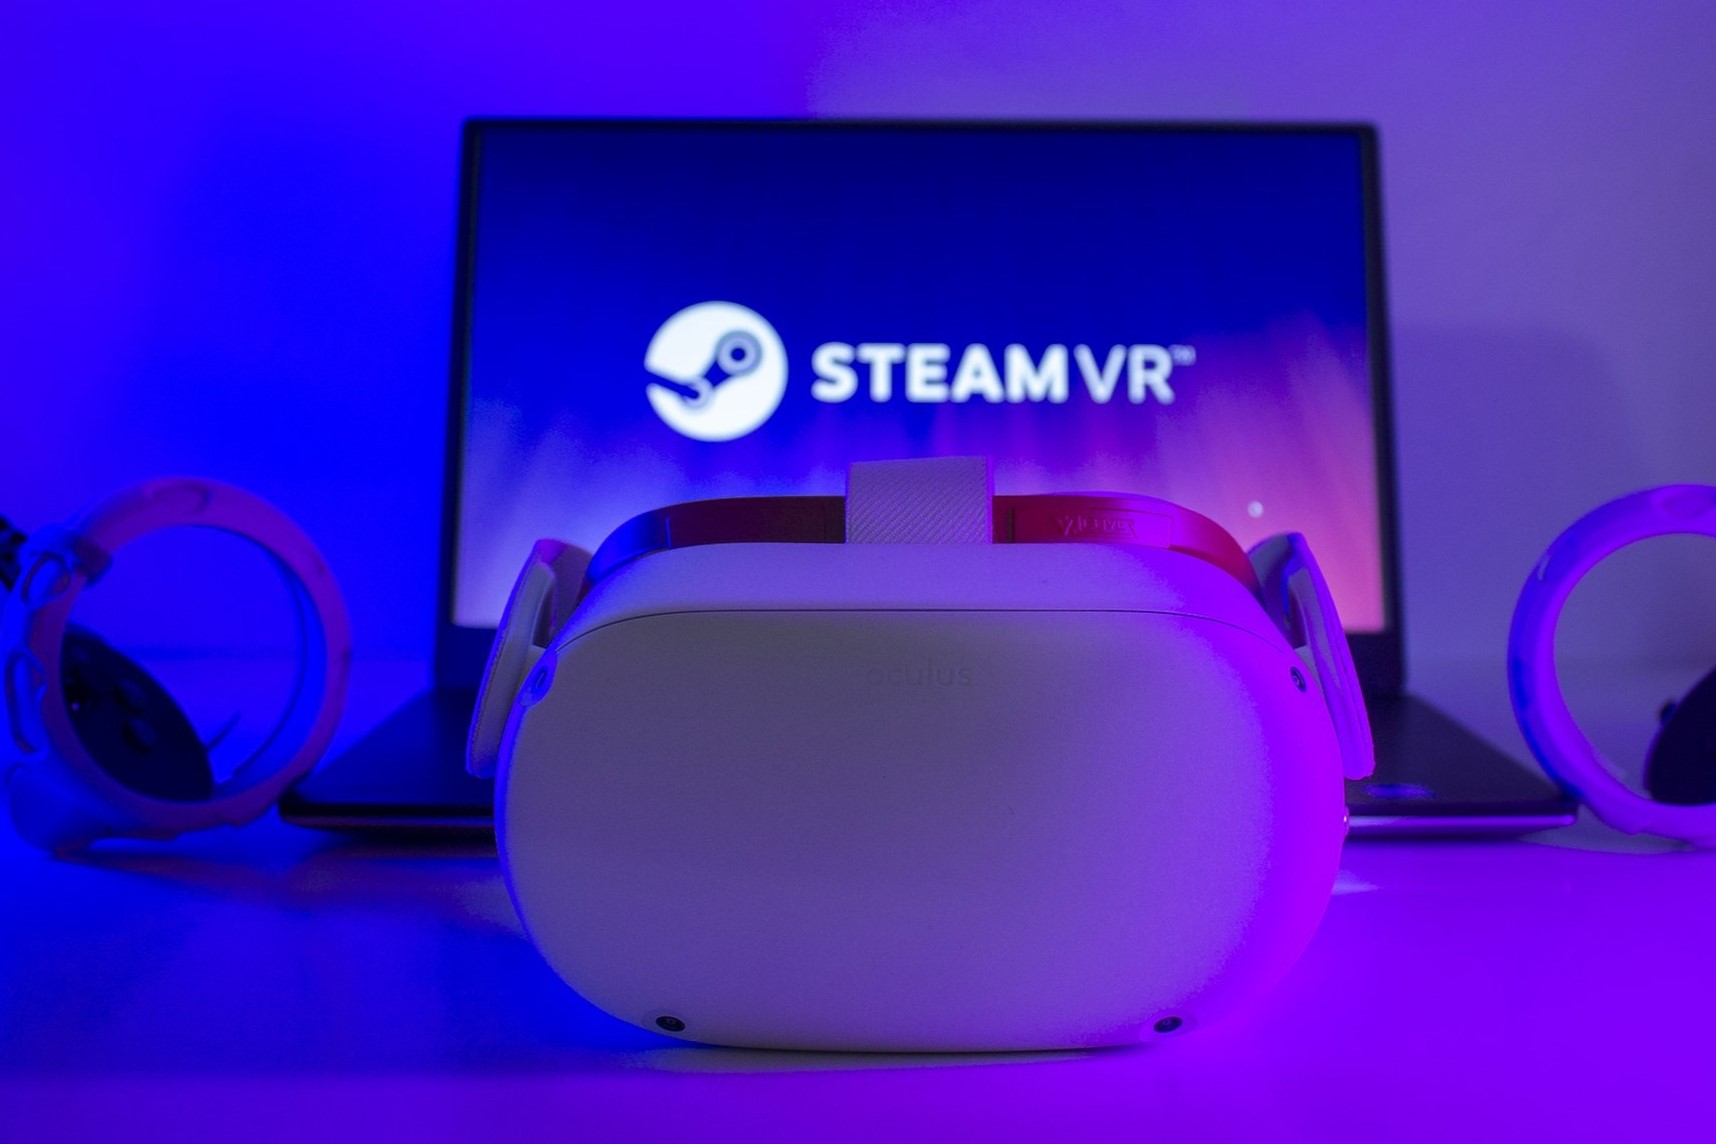 Managing Preferences: Disabling Steam VR When Needed